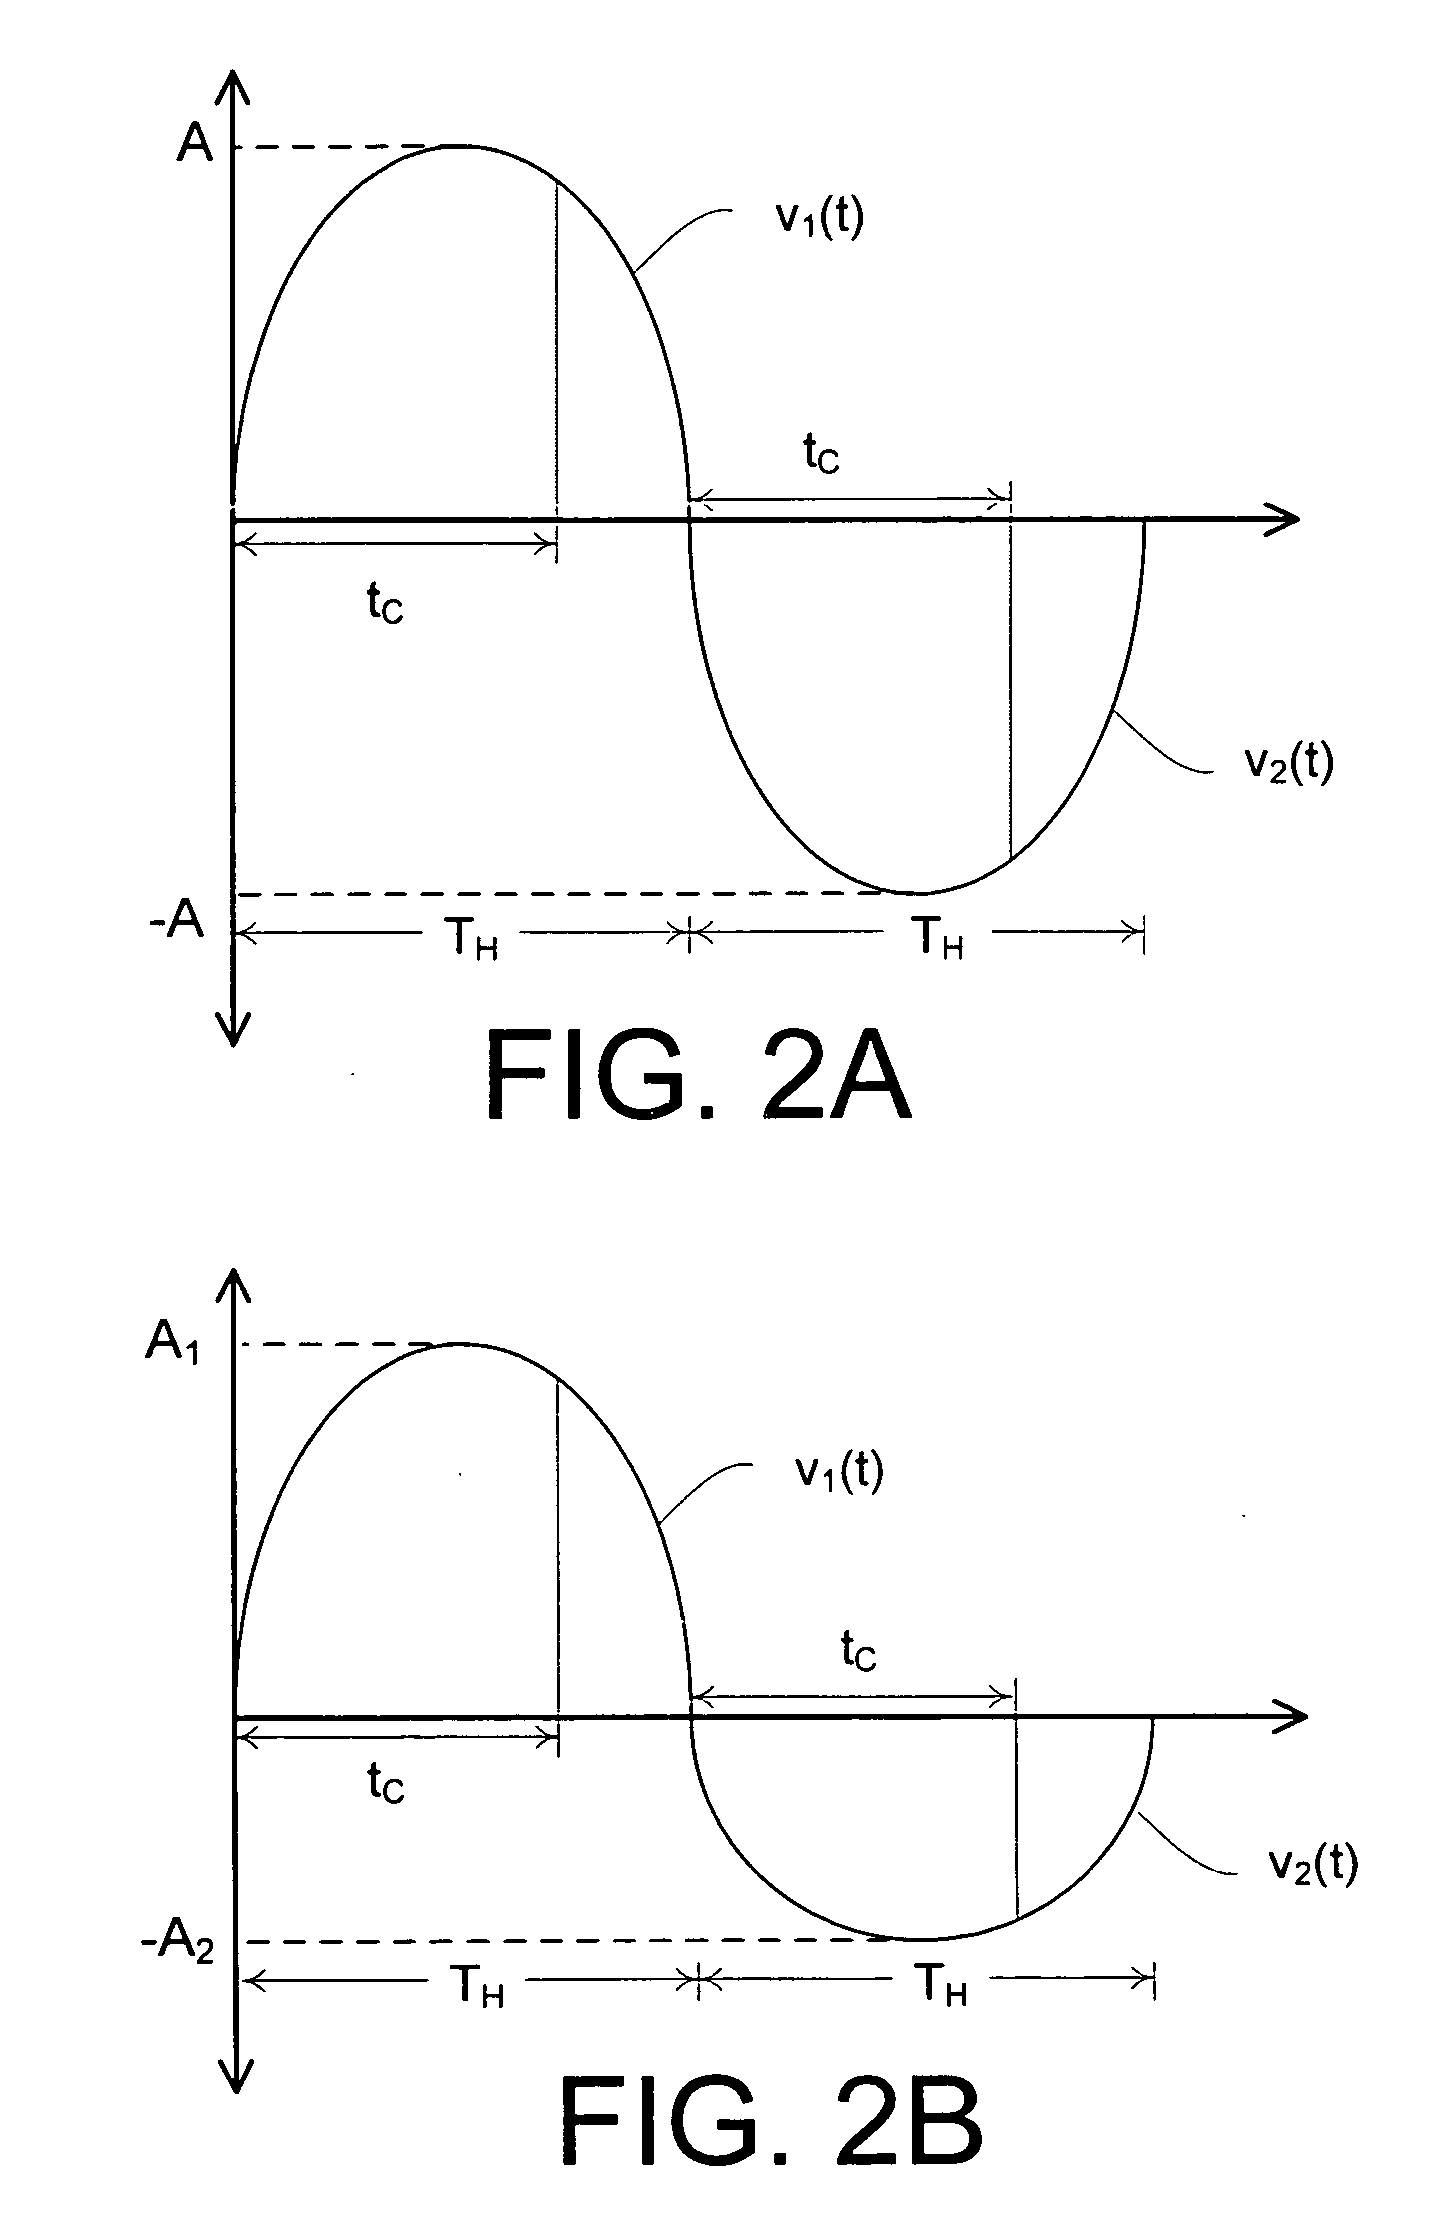 Apparatus and methods for regulating delivery of electrical energy